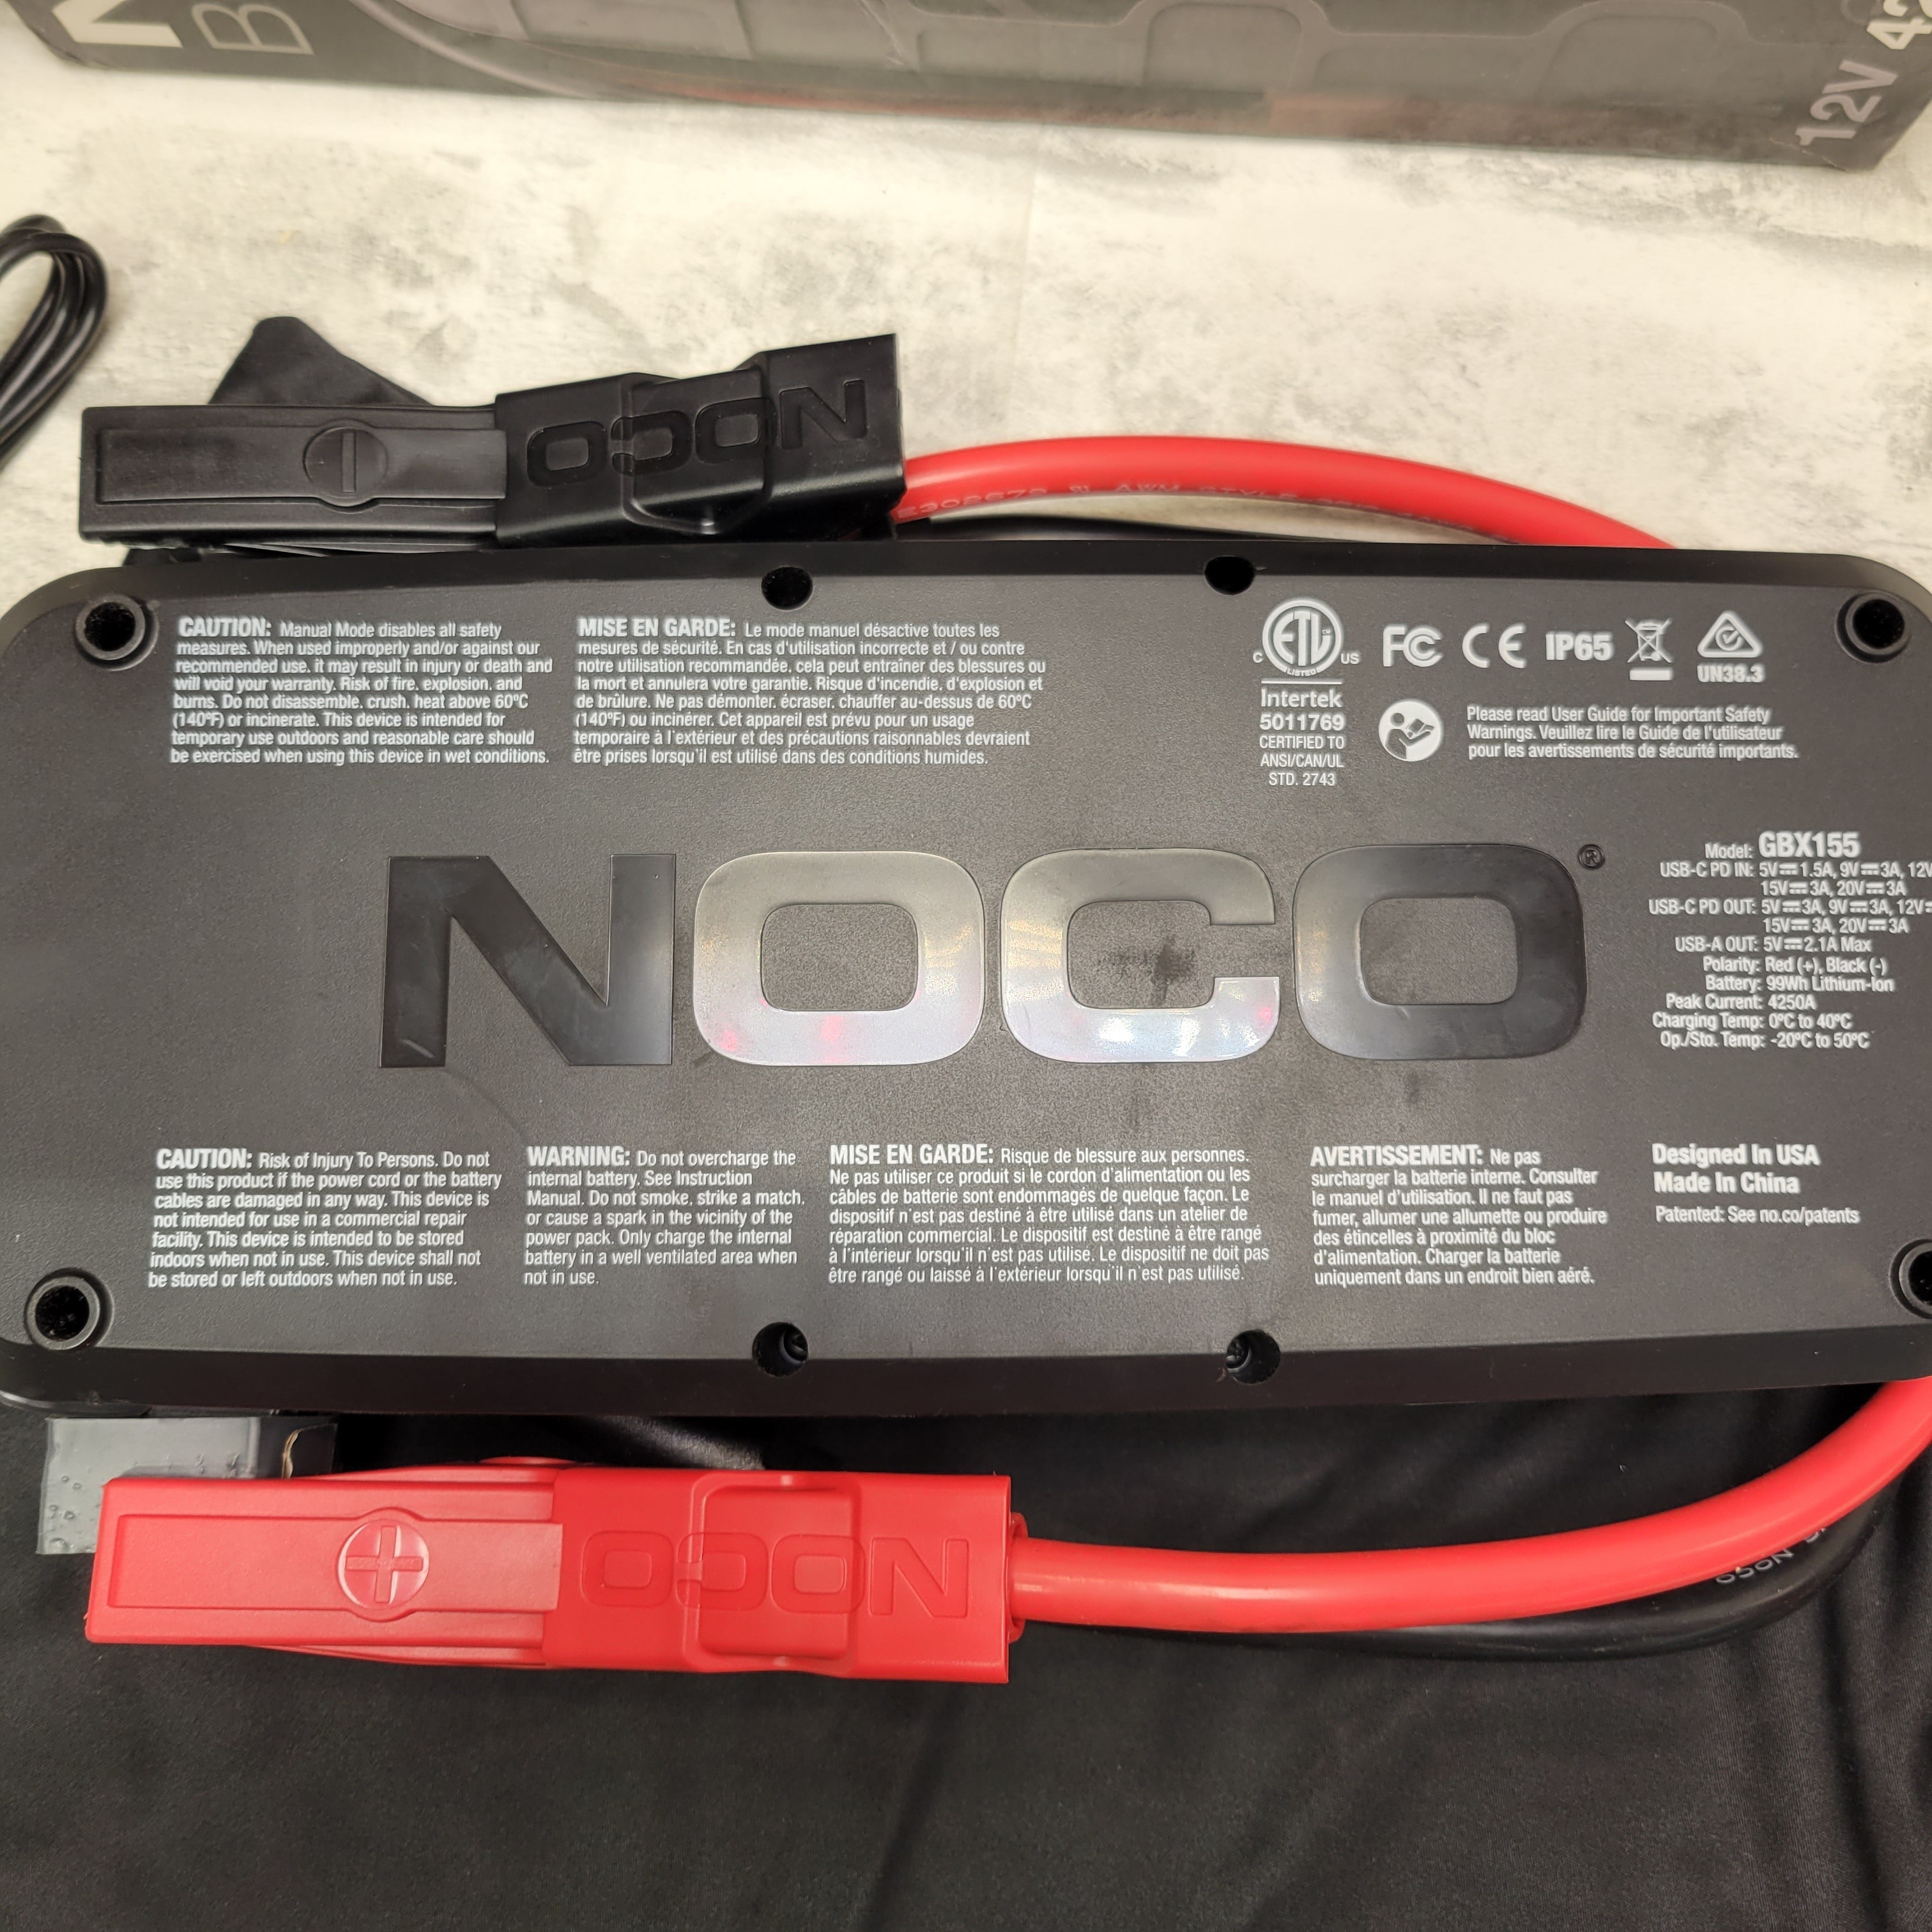 *FOR PARTS* NOCO Boost X GBX155 4250A 12V Portable Lithium Jump Starter (7765448818926)